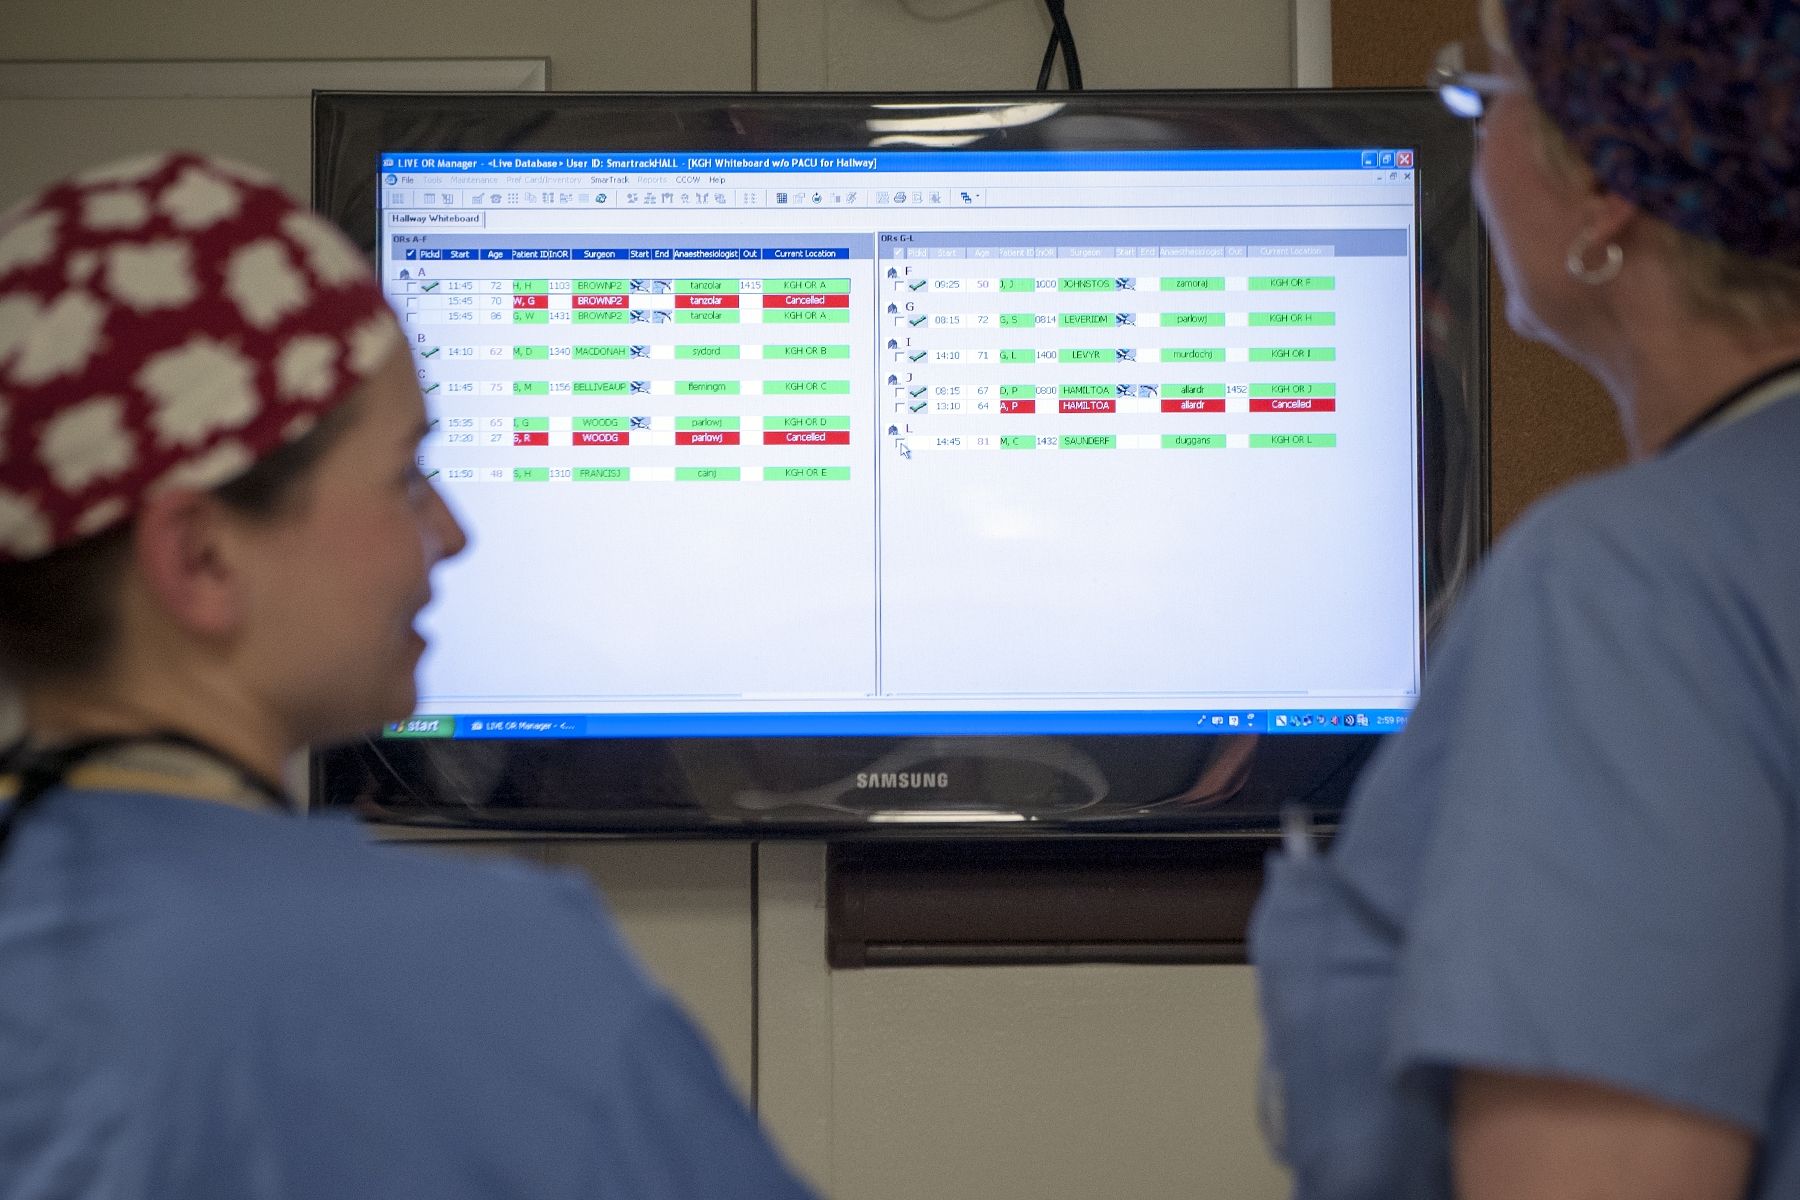 KGH staff looking at a monitor with SmartTrack system